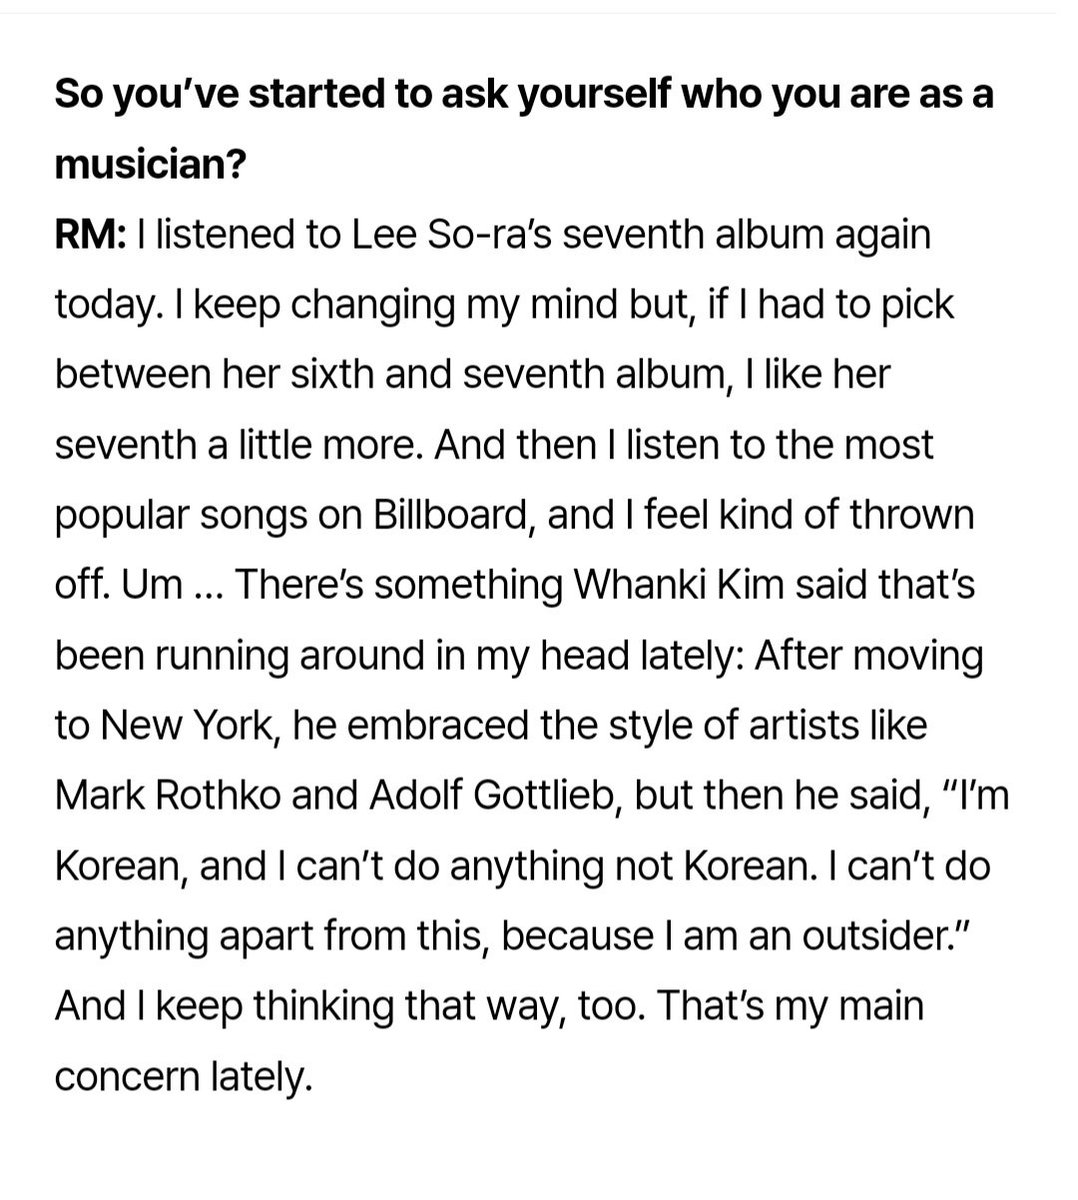 i immediately remembered namjoon quoting kim whanki in his 2020 weverse interview: 'i can’t do anything apart from this, because i am an outsider.'